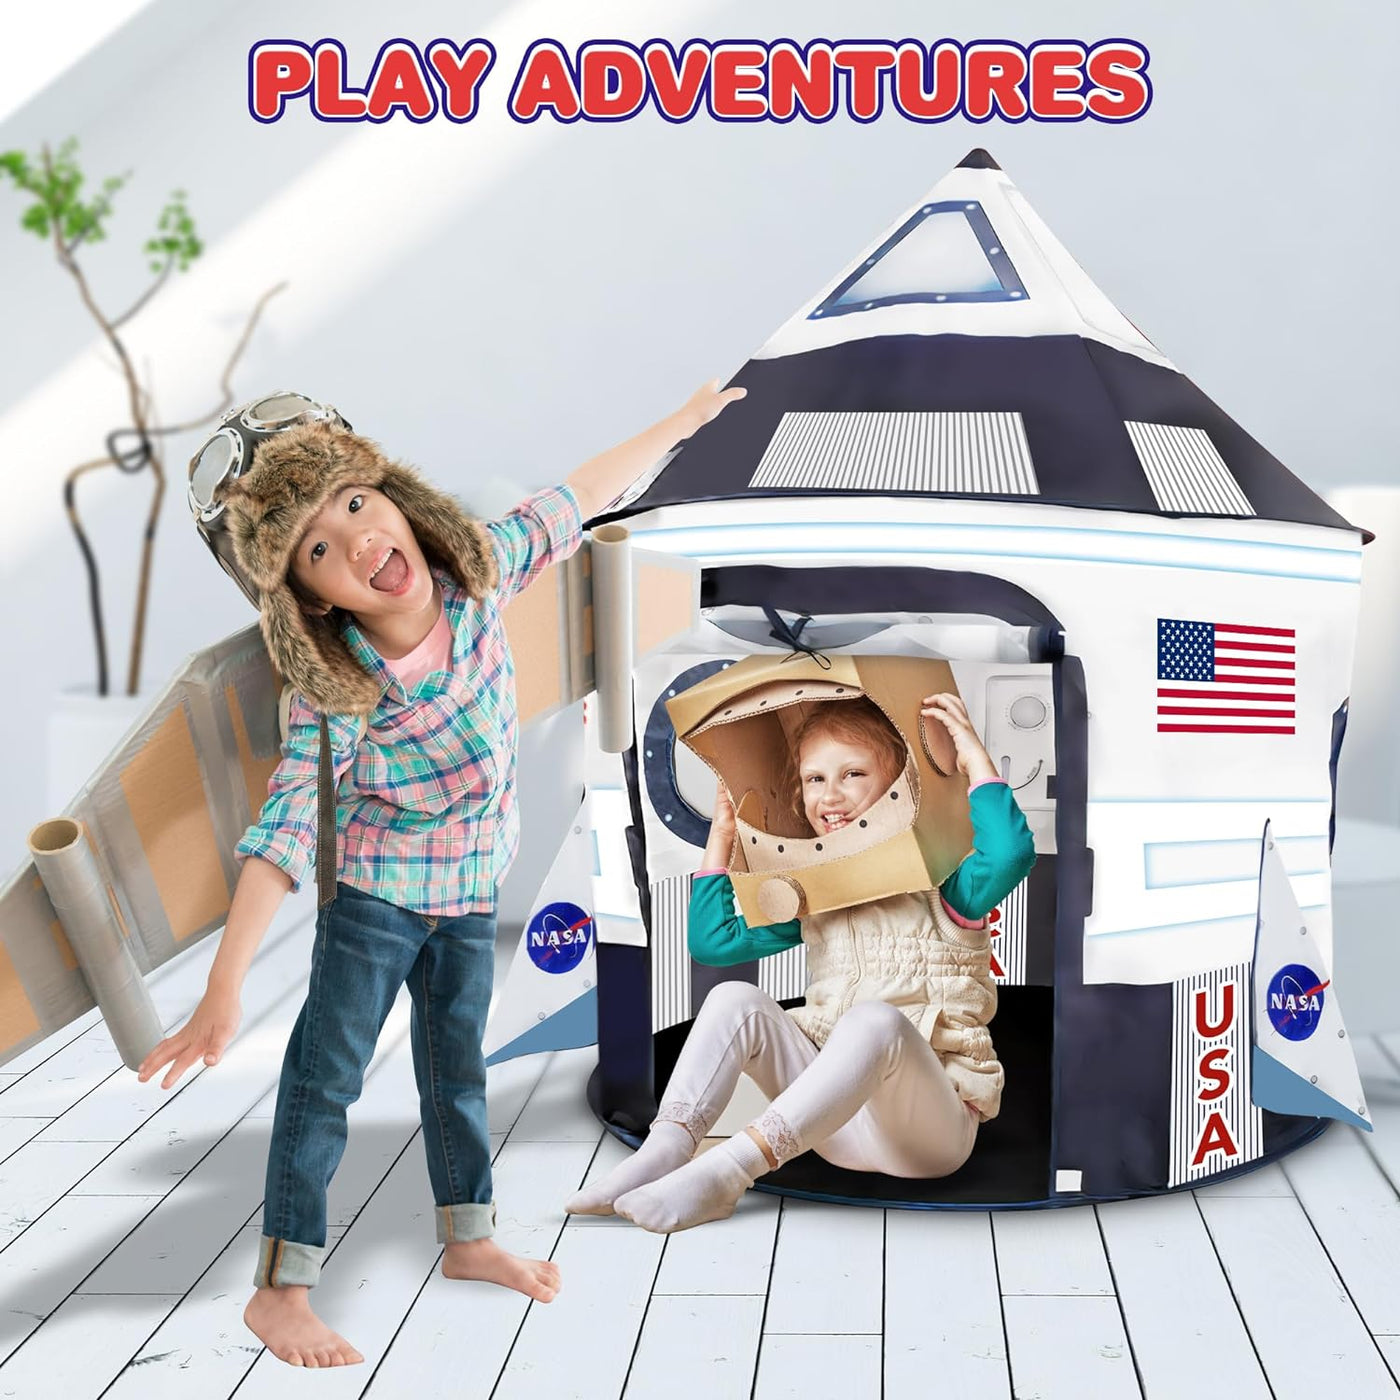 ArtCreativity Rocket Ship Pop Up Play Tent, Kids Pop Up Playhouse Tent with Carry Bag & Stabilizing Rods, Spacious Kids Indoor & Outdoor Tent, Easy-Install Spaceship Tent for Space Birthday Decoration